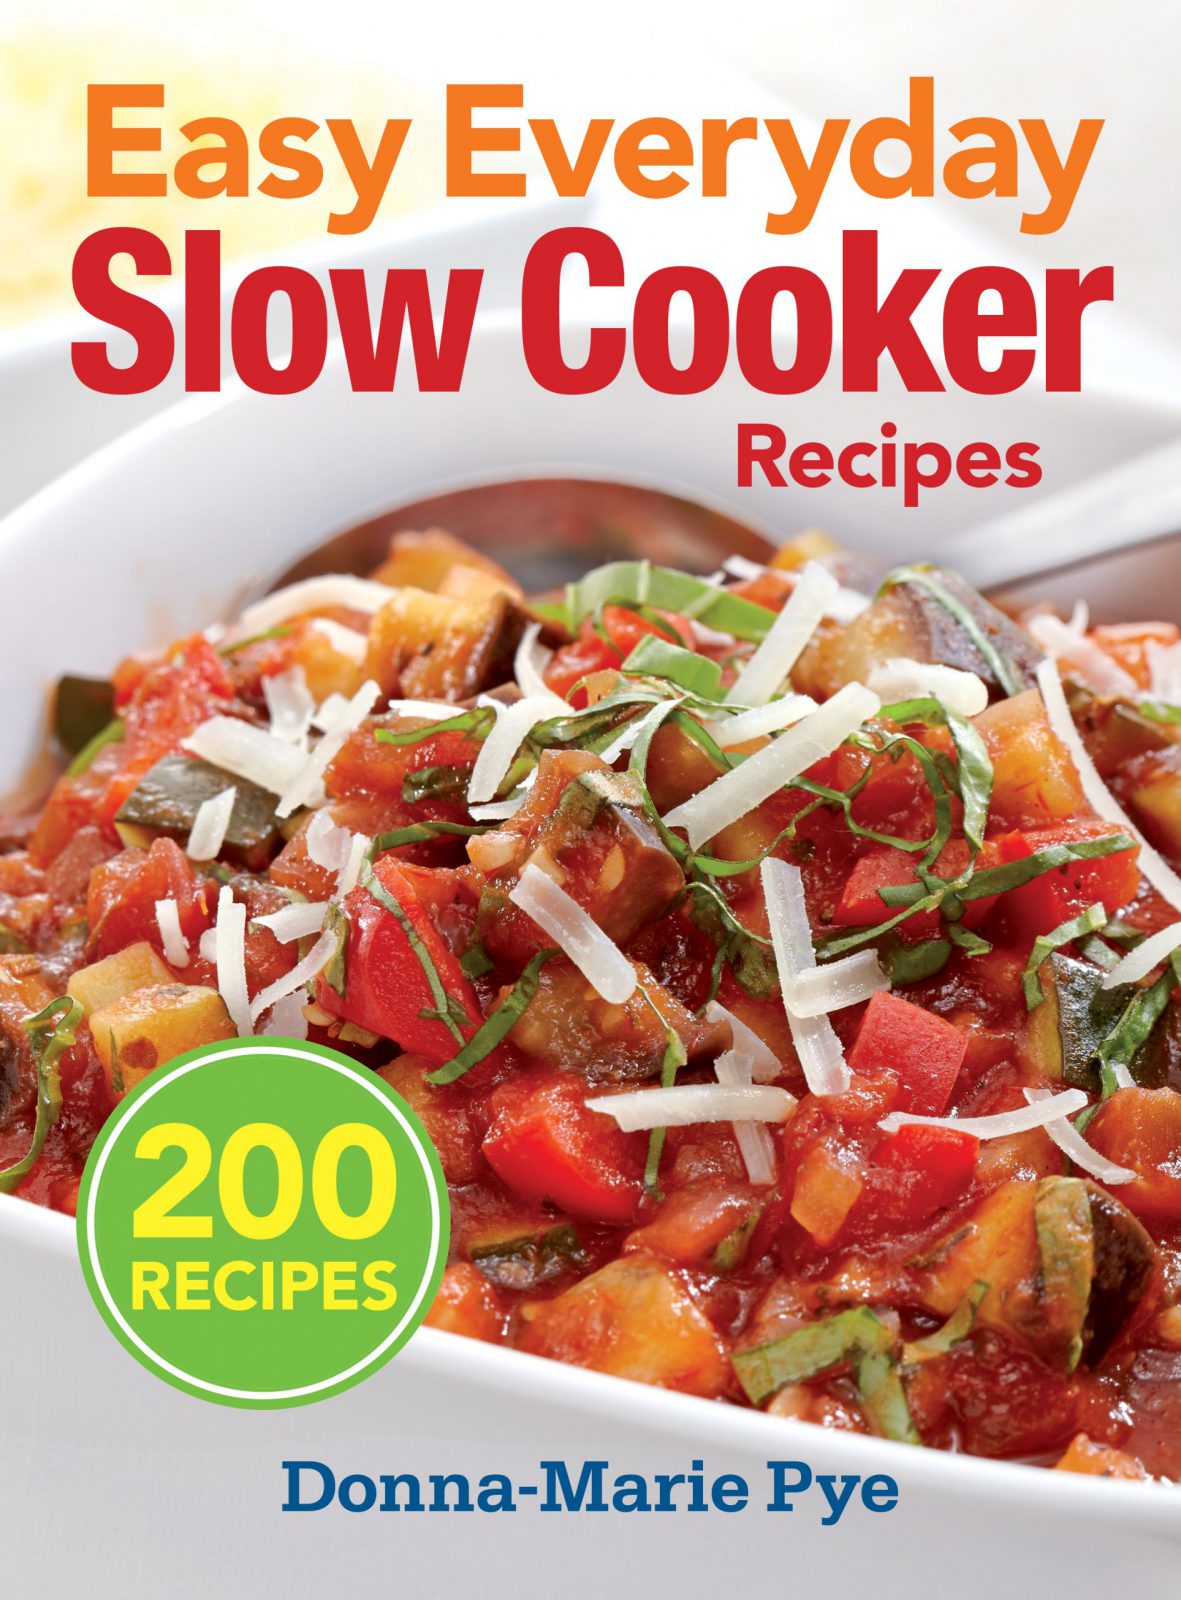 Easy Everyday Slow Cooker Recipes